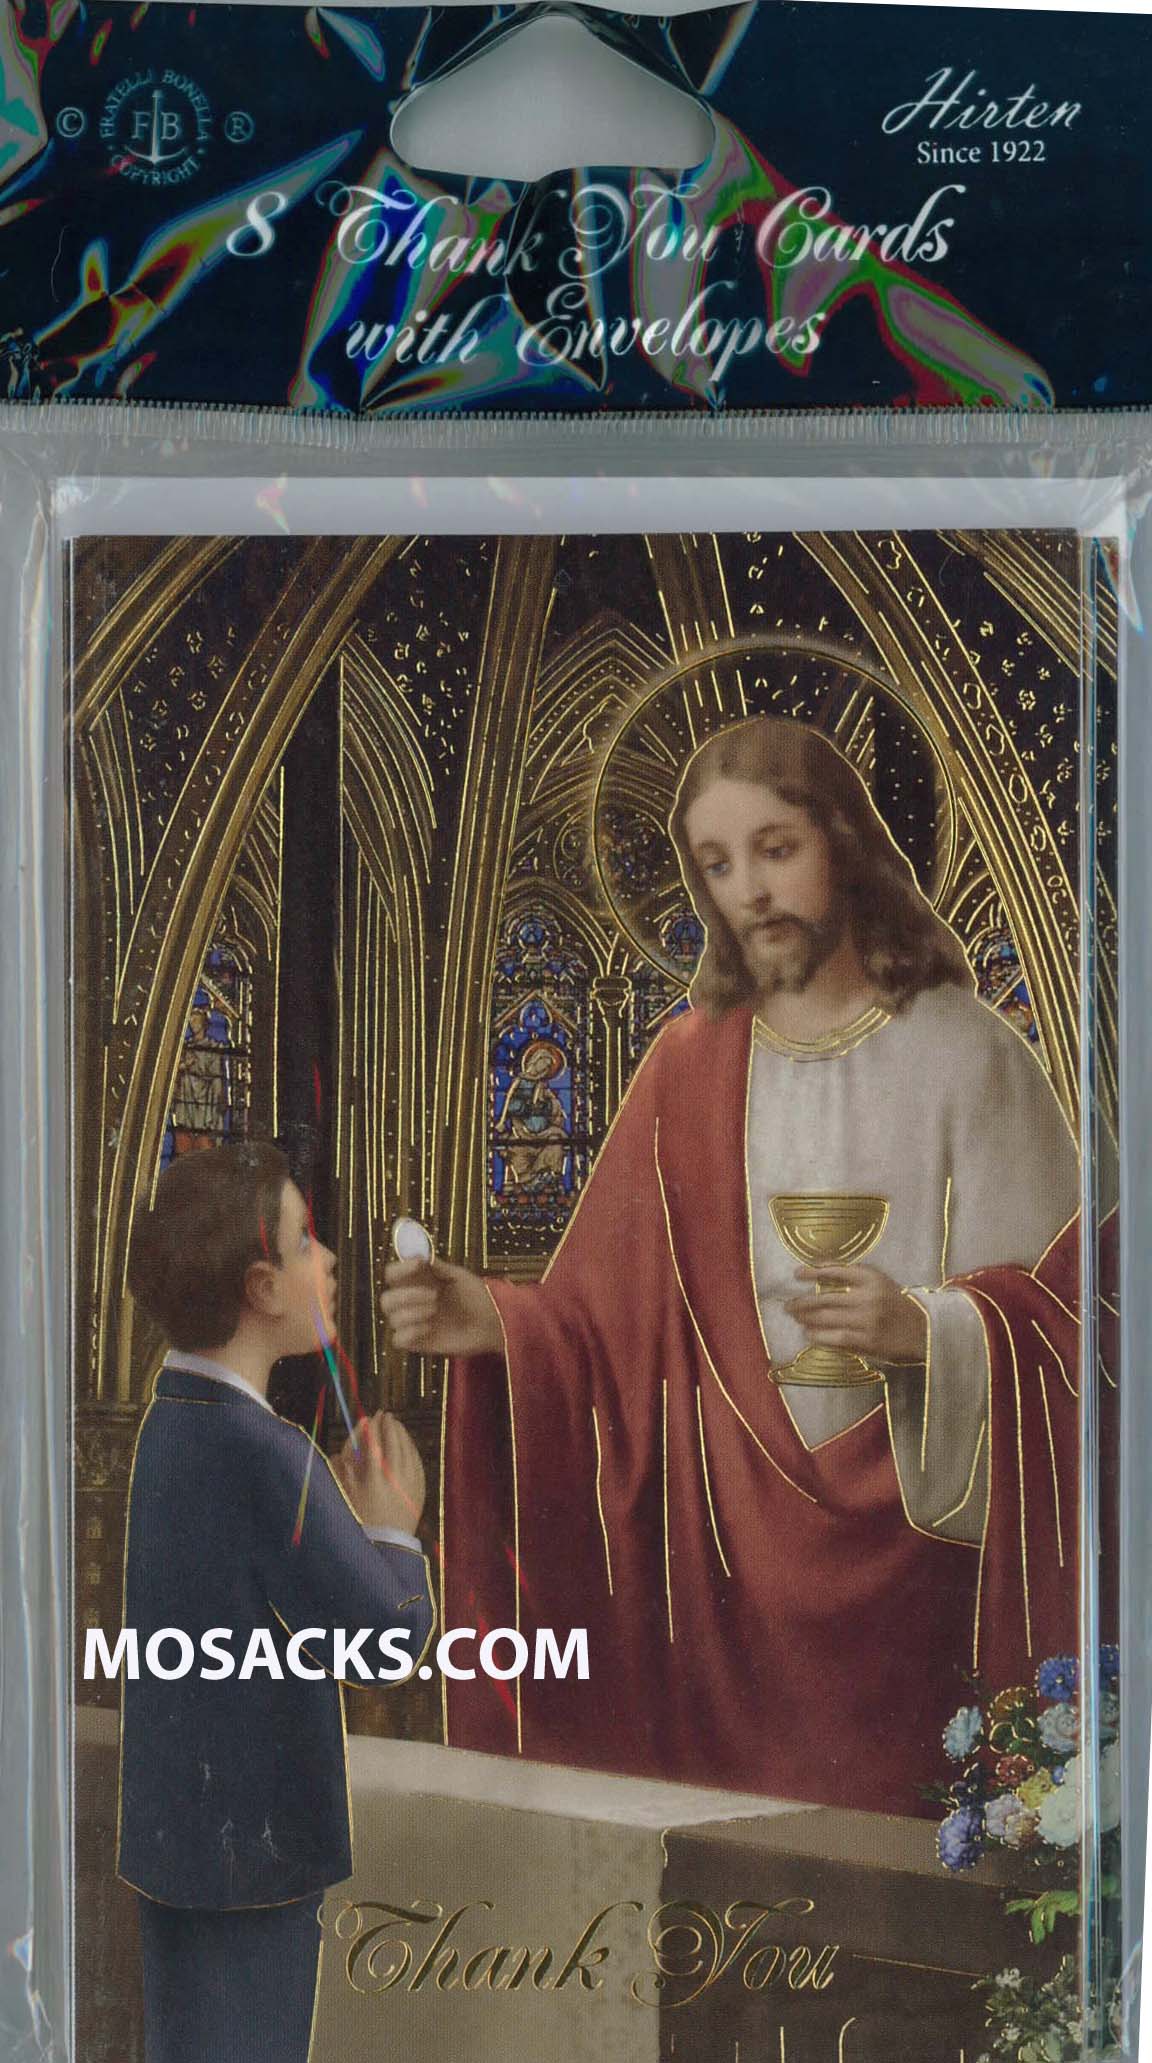 First Communion Child Of God Thank You Notes Boy 12-CT-674 is a Boy First Communion Child Of God Thank You Notes 12-CT-674